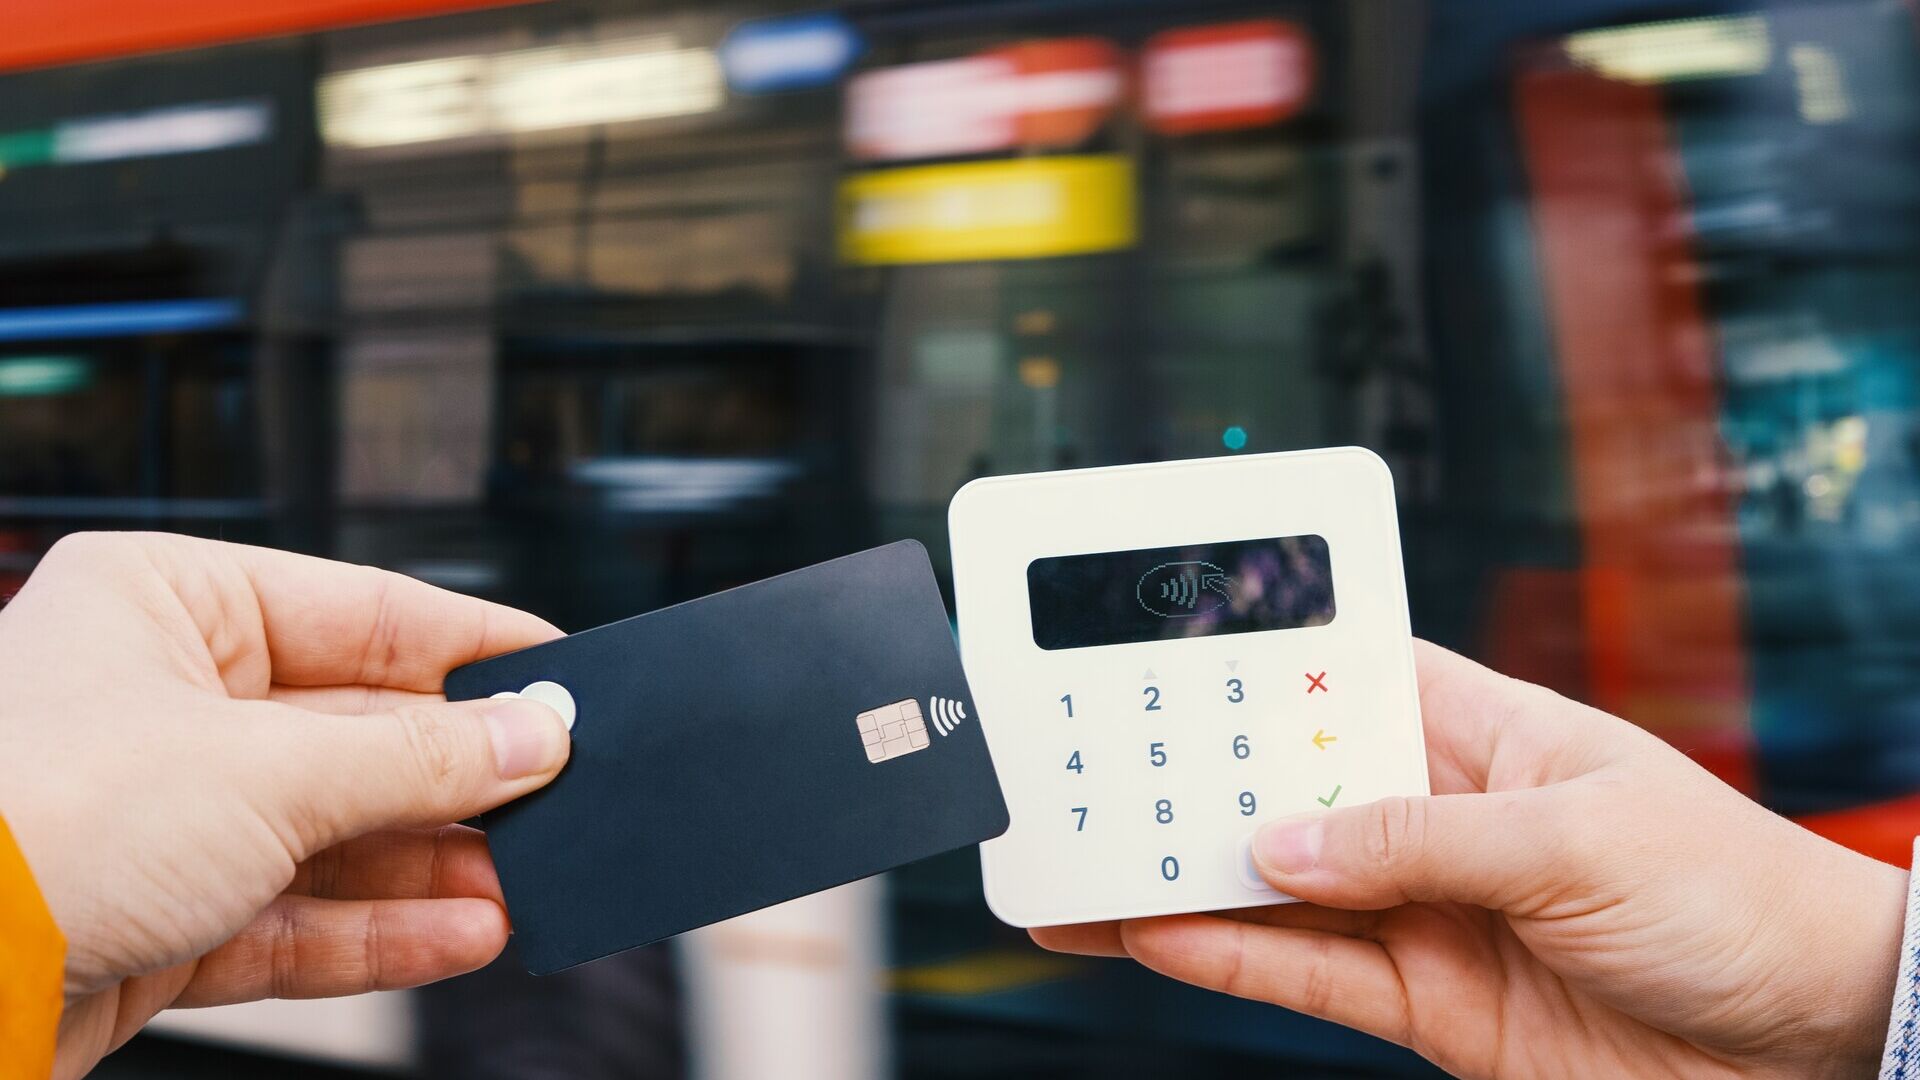 Mobile payments: small businesses allow card or digital payments often for large amounts because otherwise they would have higher transaction costs